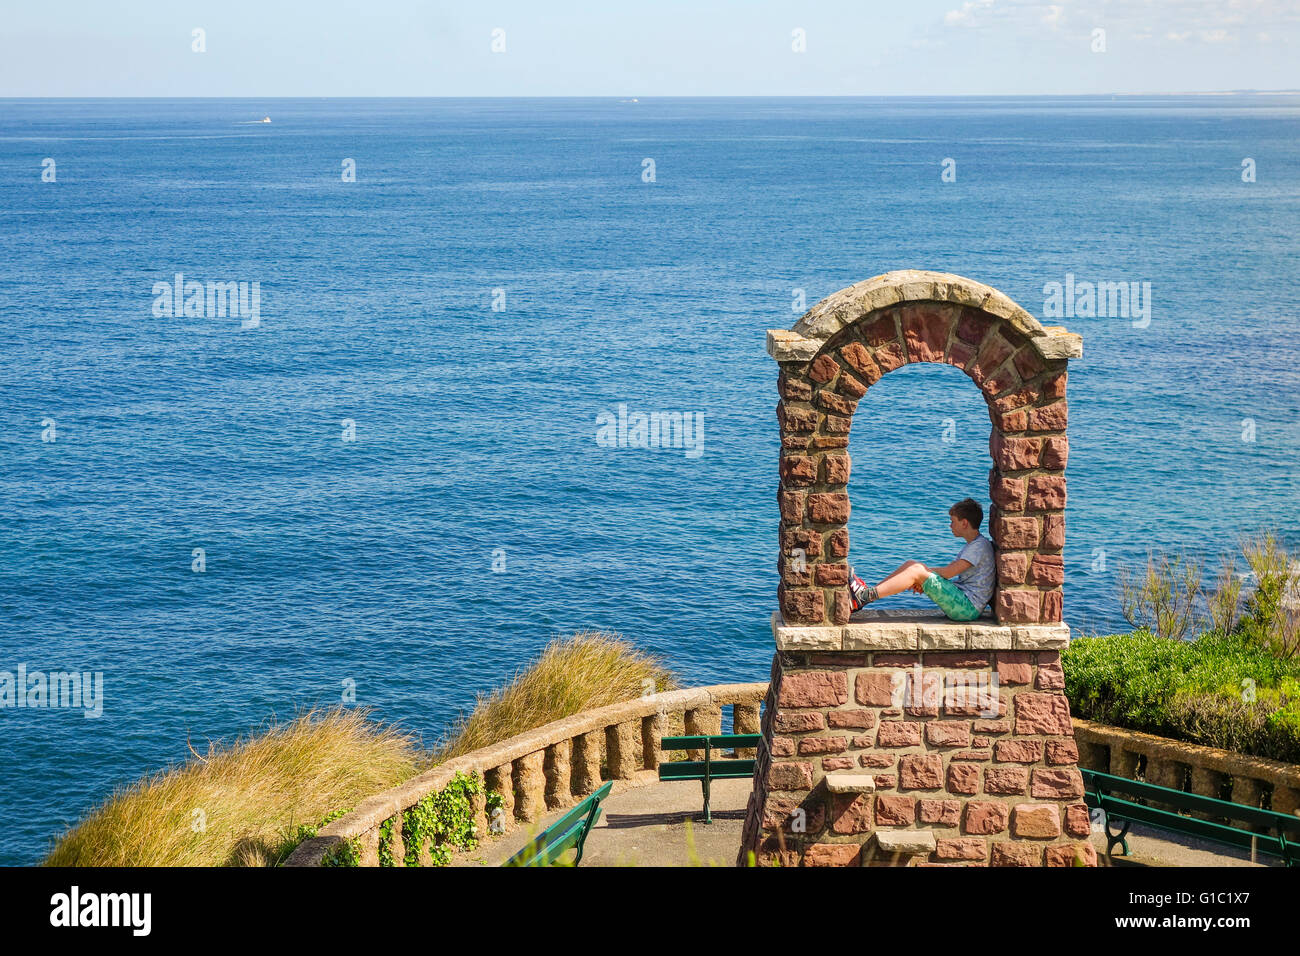 Boy sits in ancient bell tower, Biarritz, Plateau Atalaye, Aquitaine, Basque country, France. Stock Photo